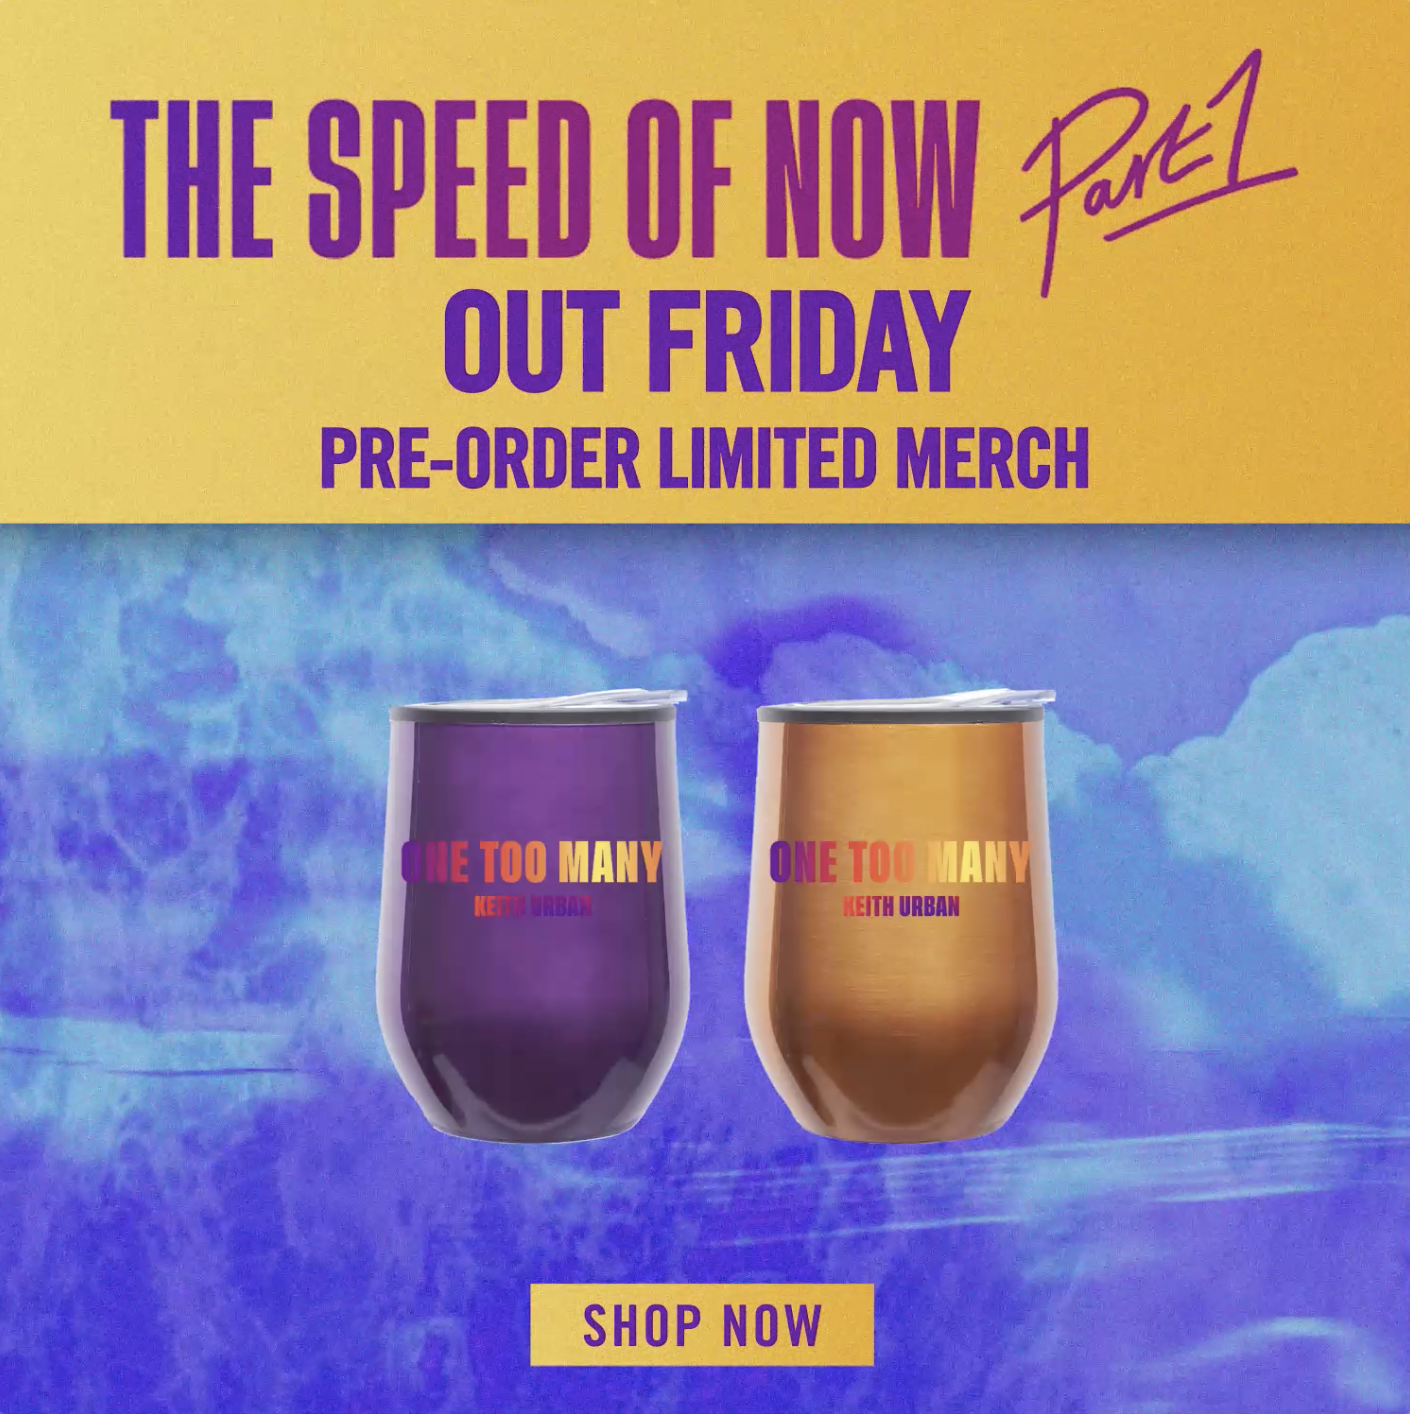 THE SPEED OF NOW Part 1 - pre-order limited edition merch